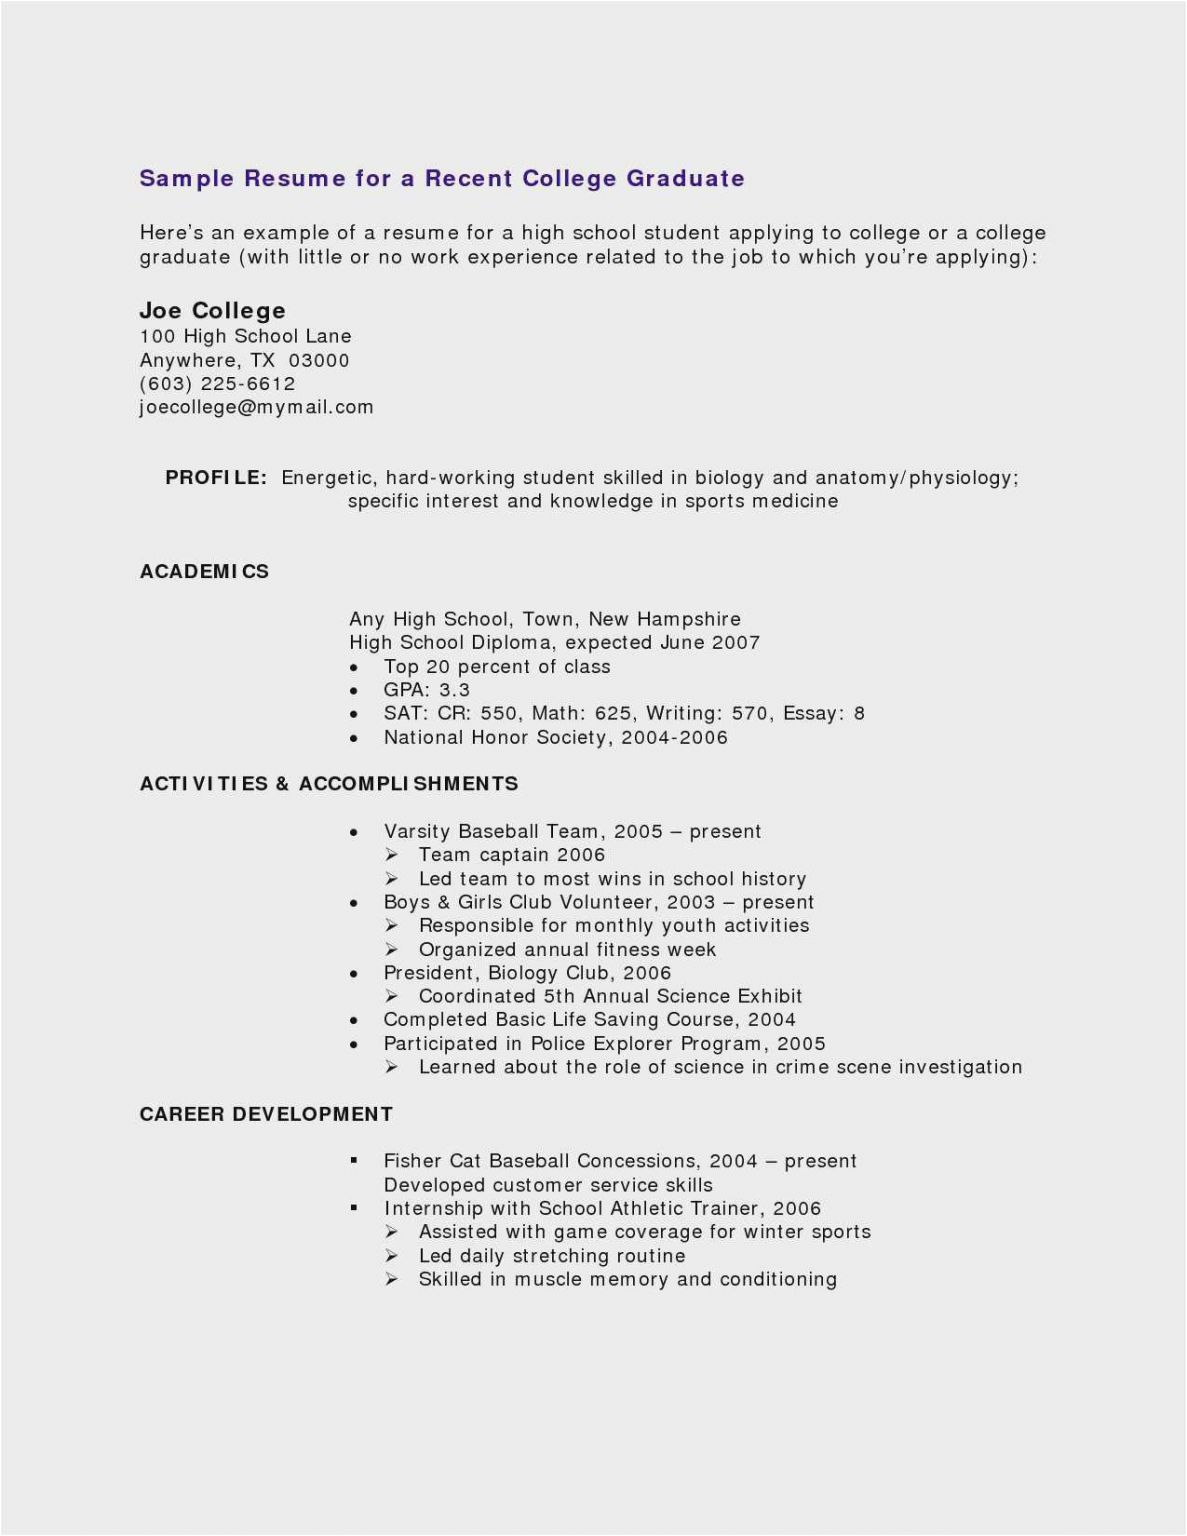 Professional Summary for Resume No Work Experience Sample Professional Summary for Resume No Work Experience Example